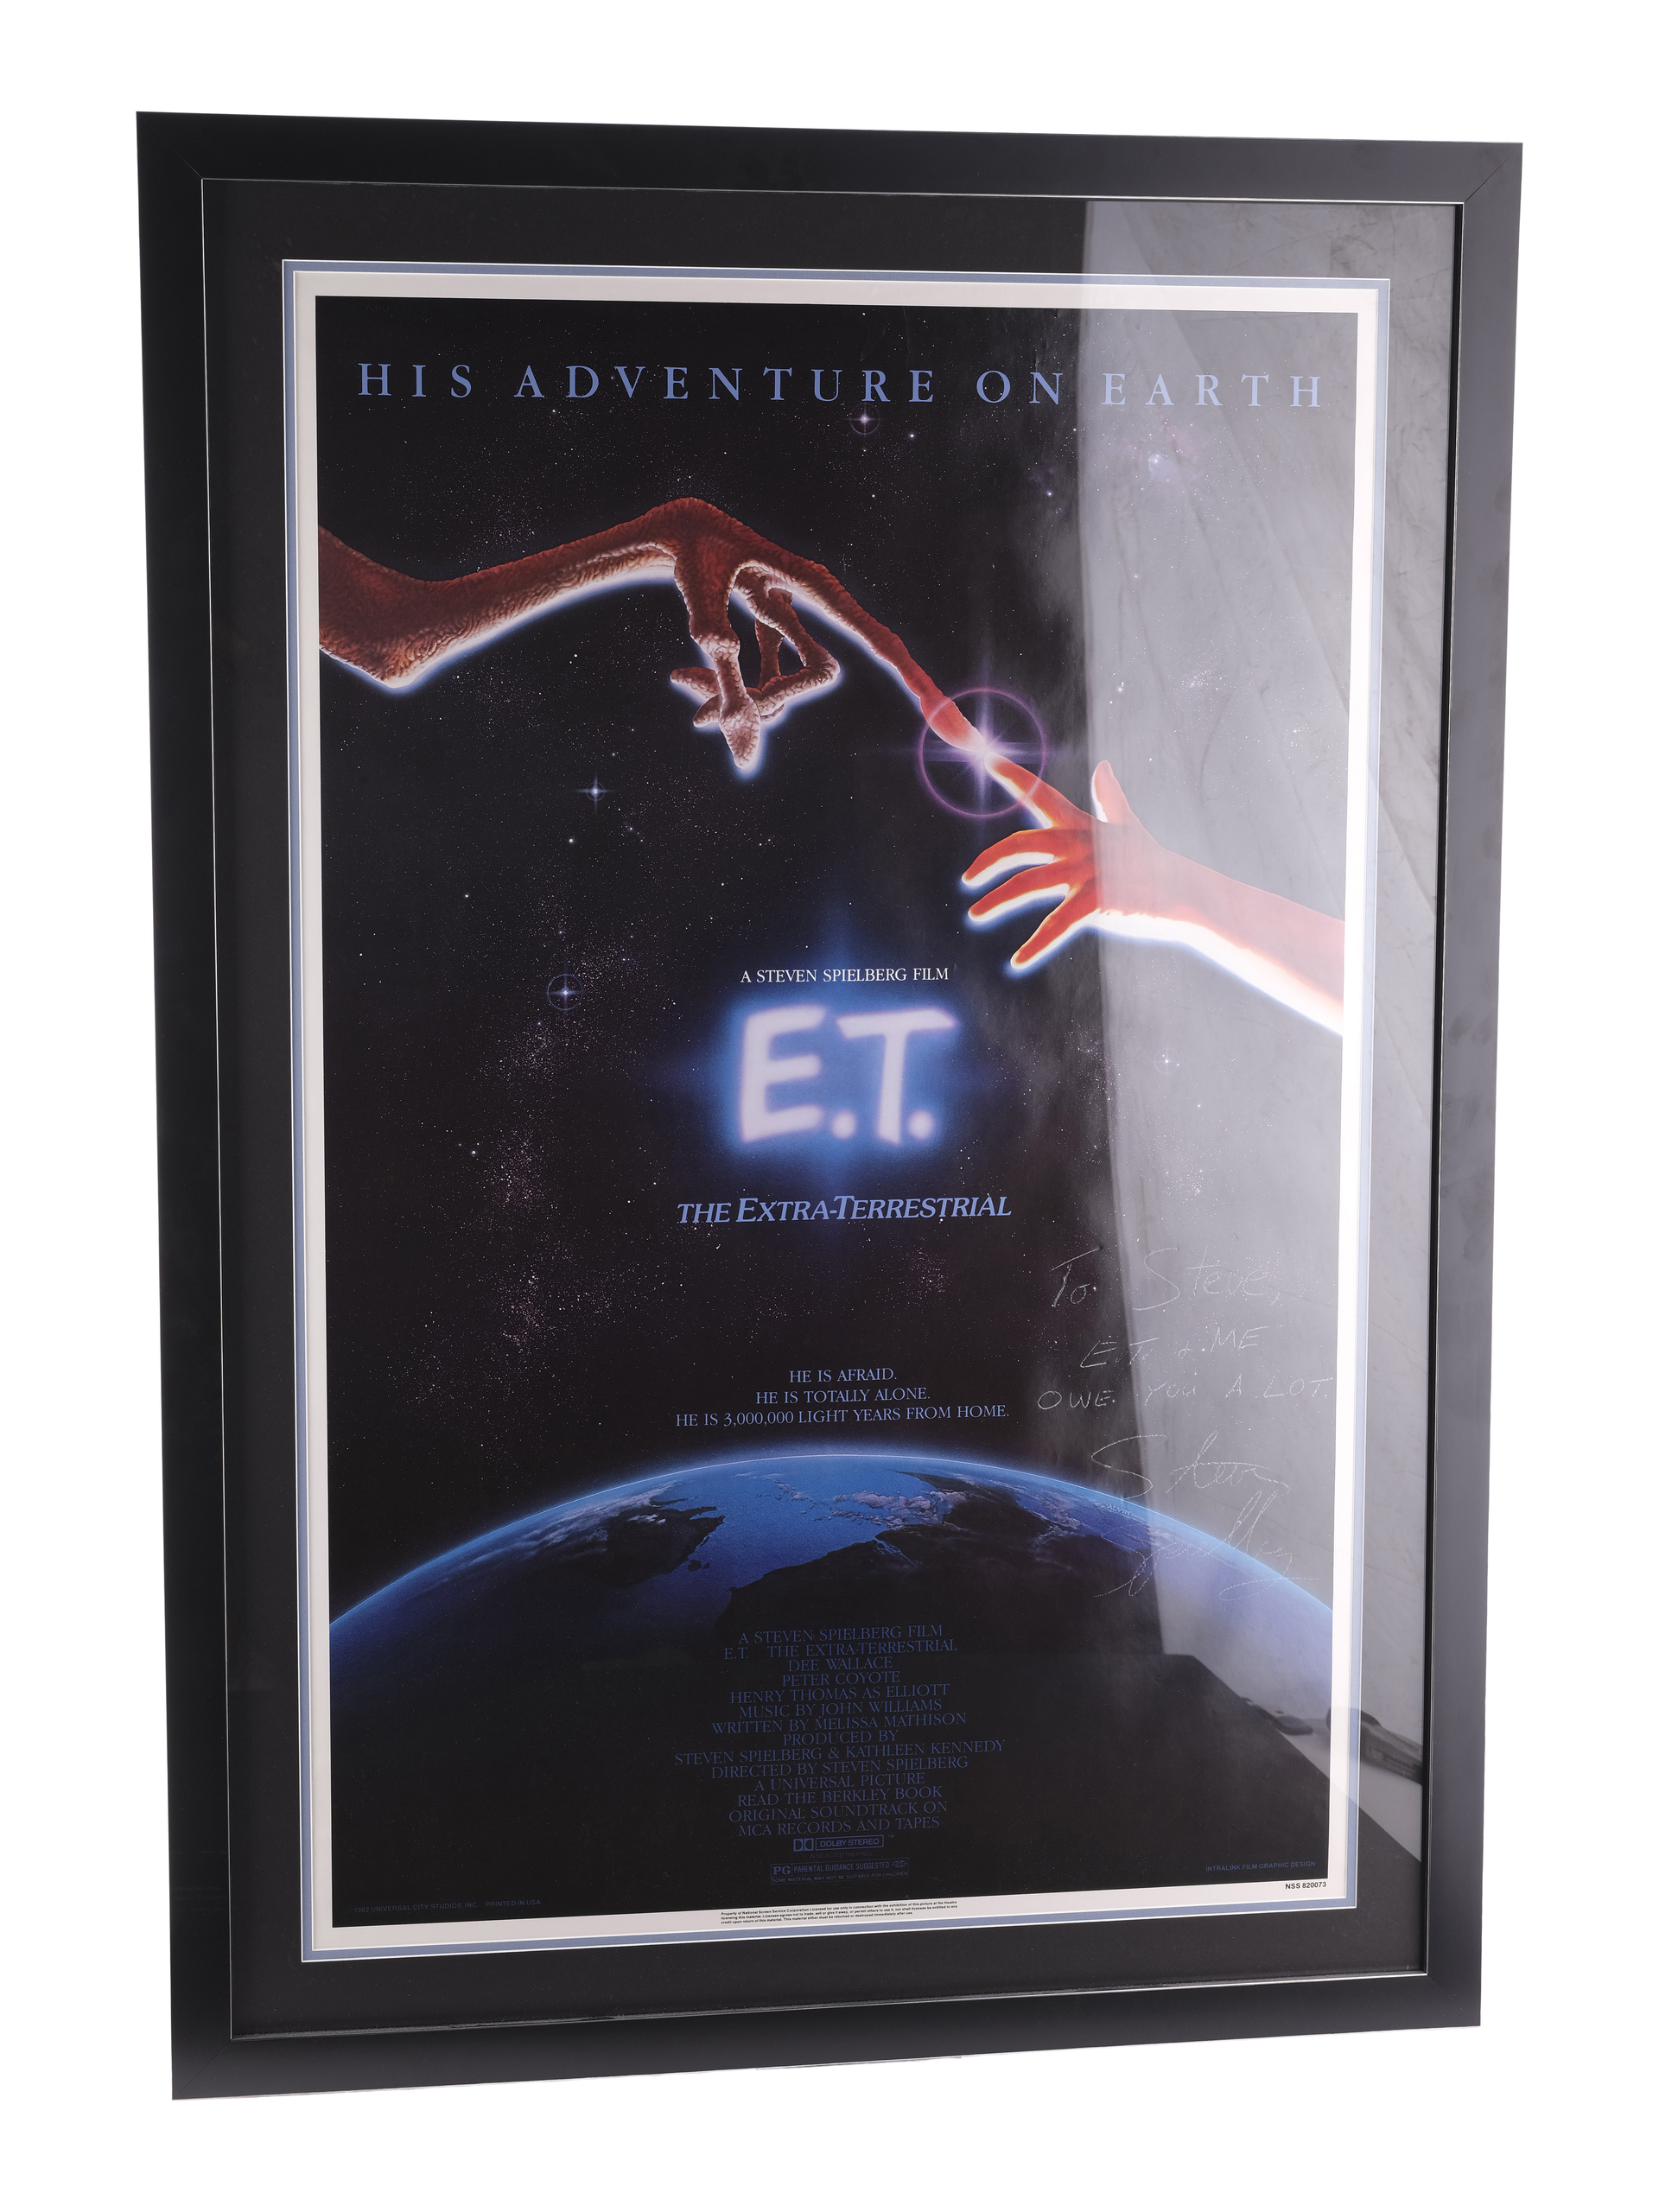 E.T. THE EXTRA-TERRESTRIAL (1982) - Framed Steven Spielberg-Autographed "Touching Fingers" One-Sheet - Image 2 of 5